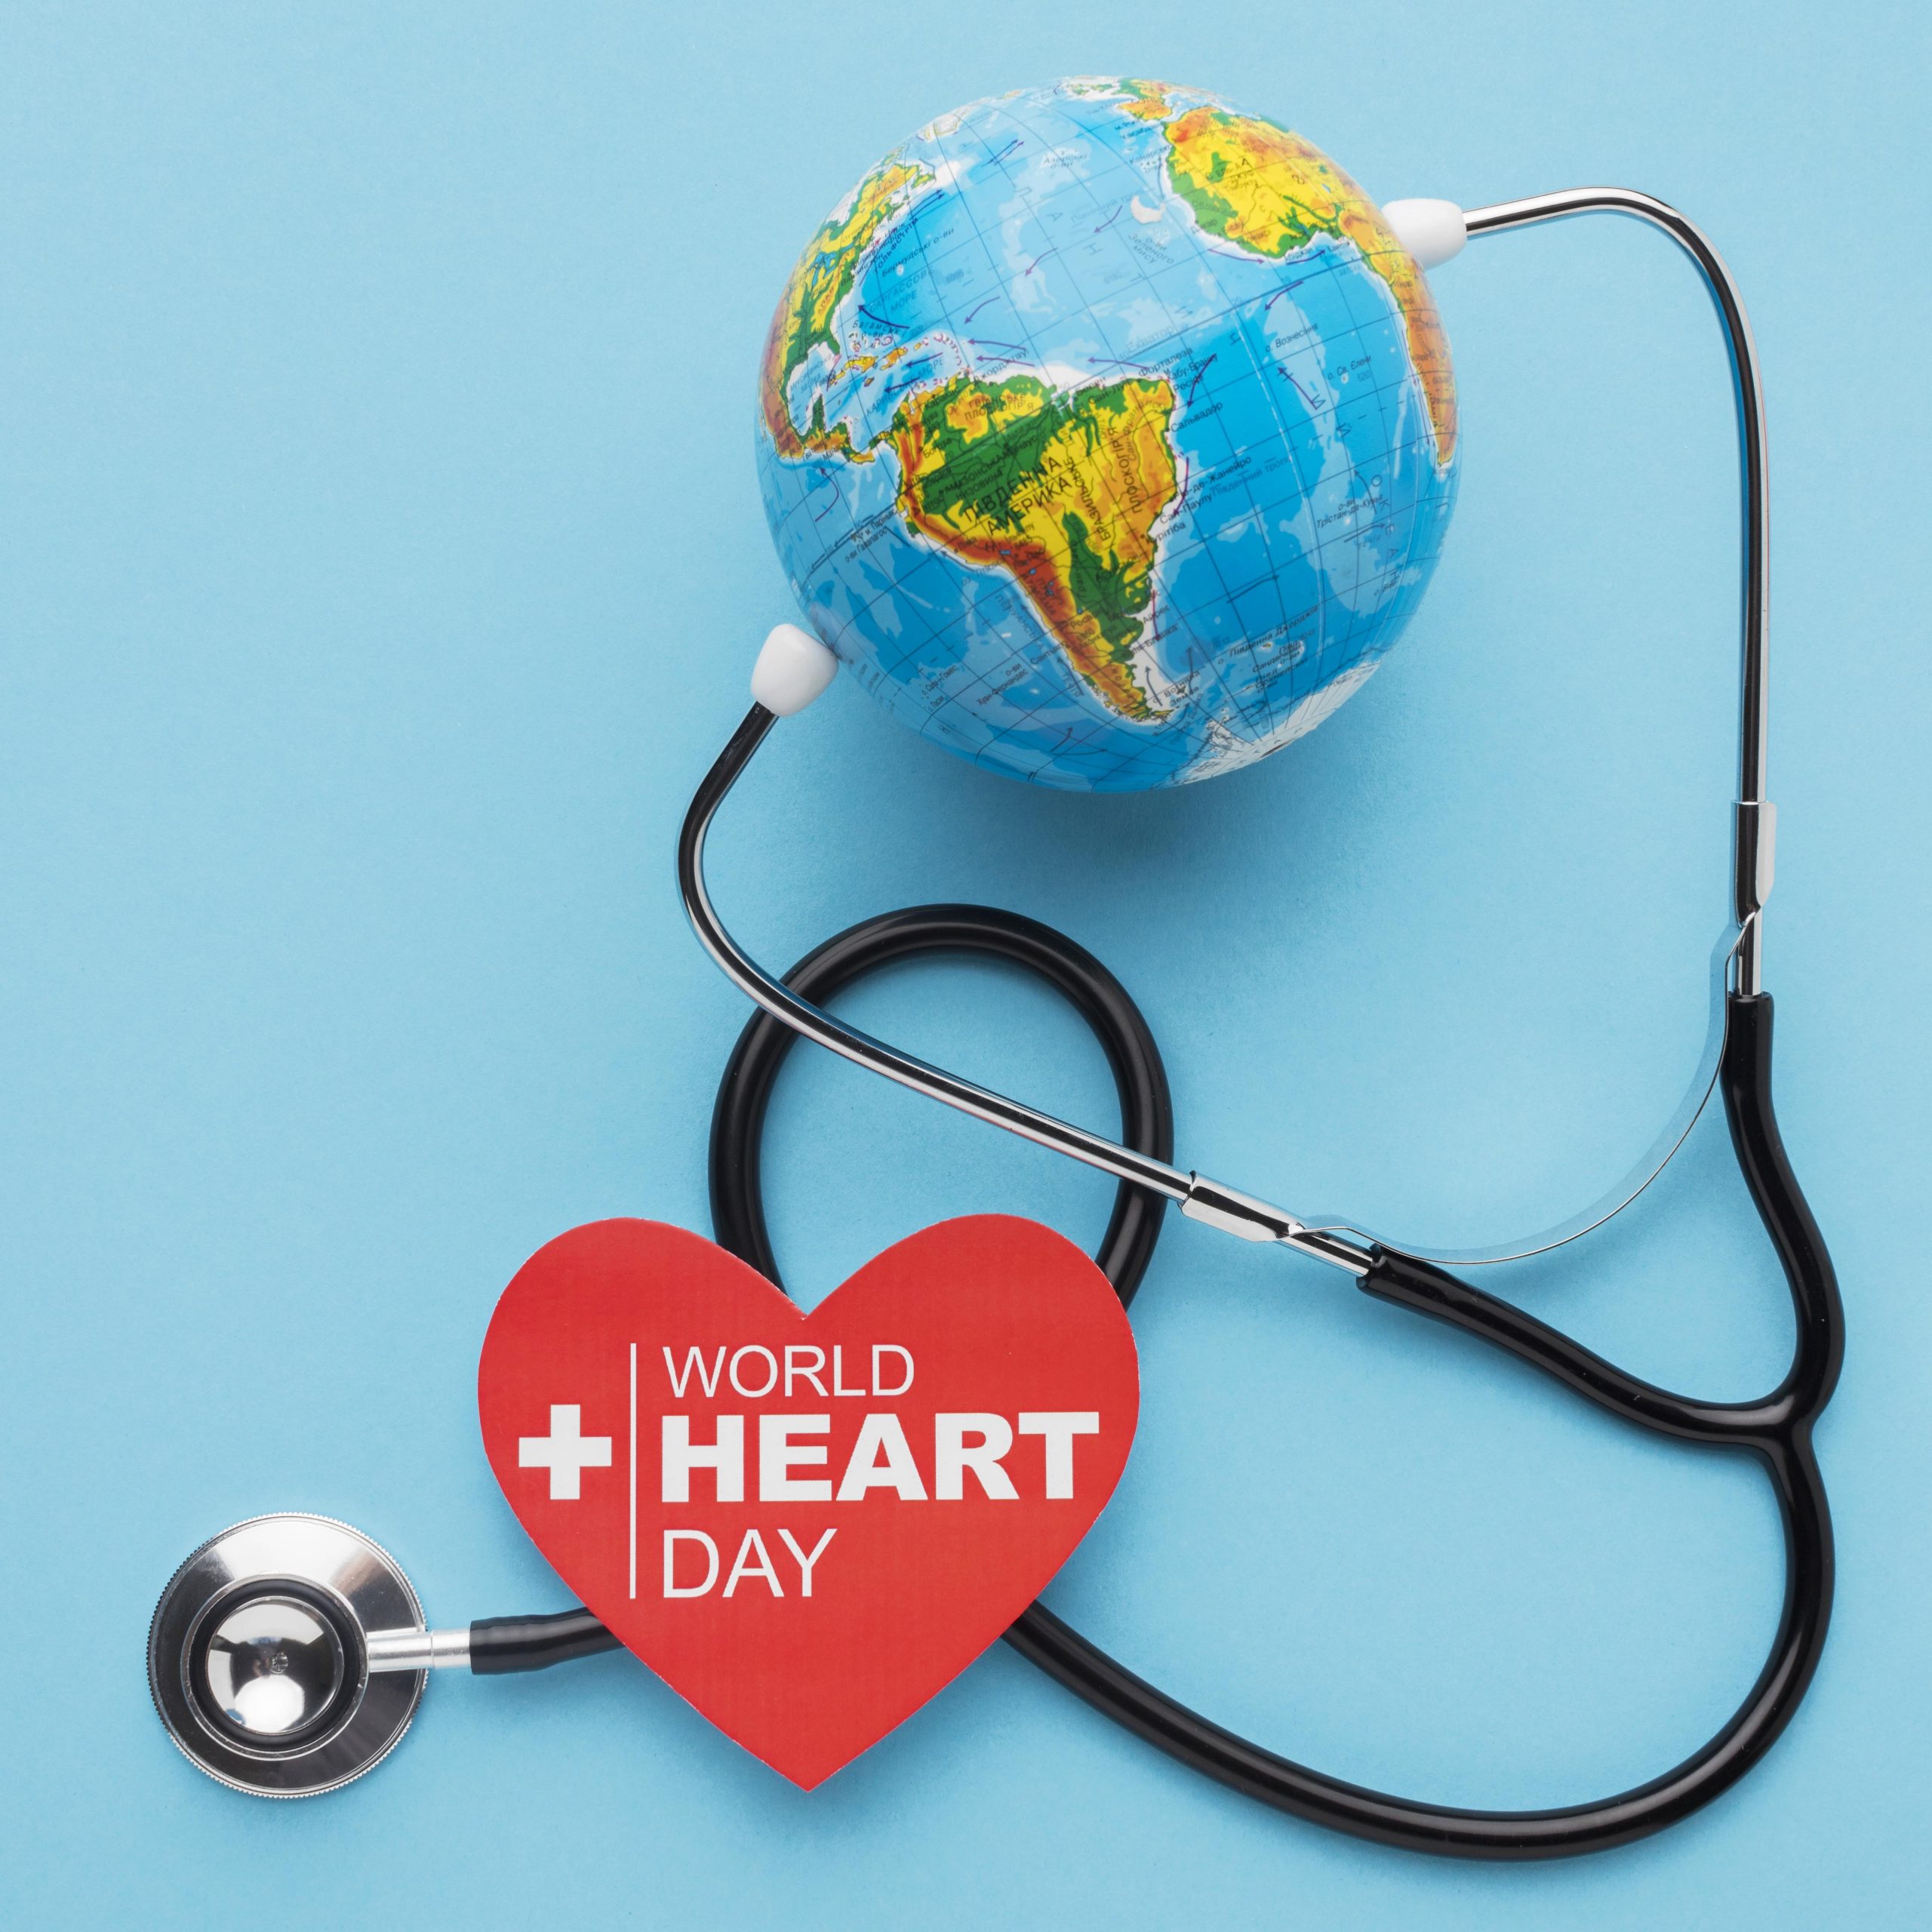 top-view-world-heart-day-concept-with-globe